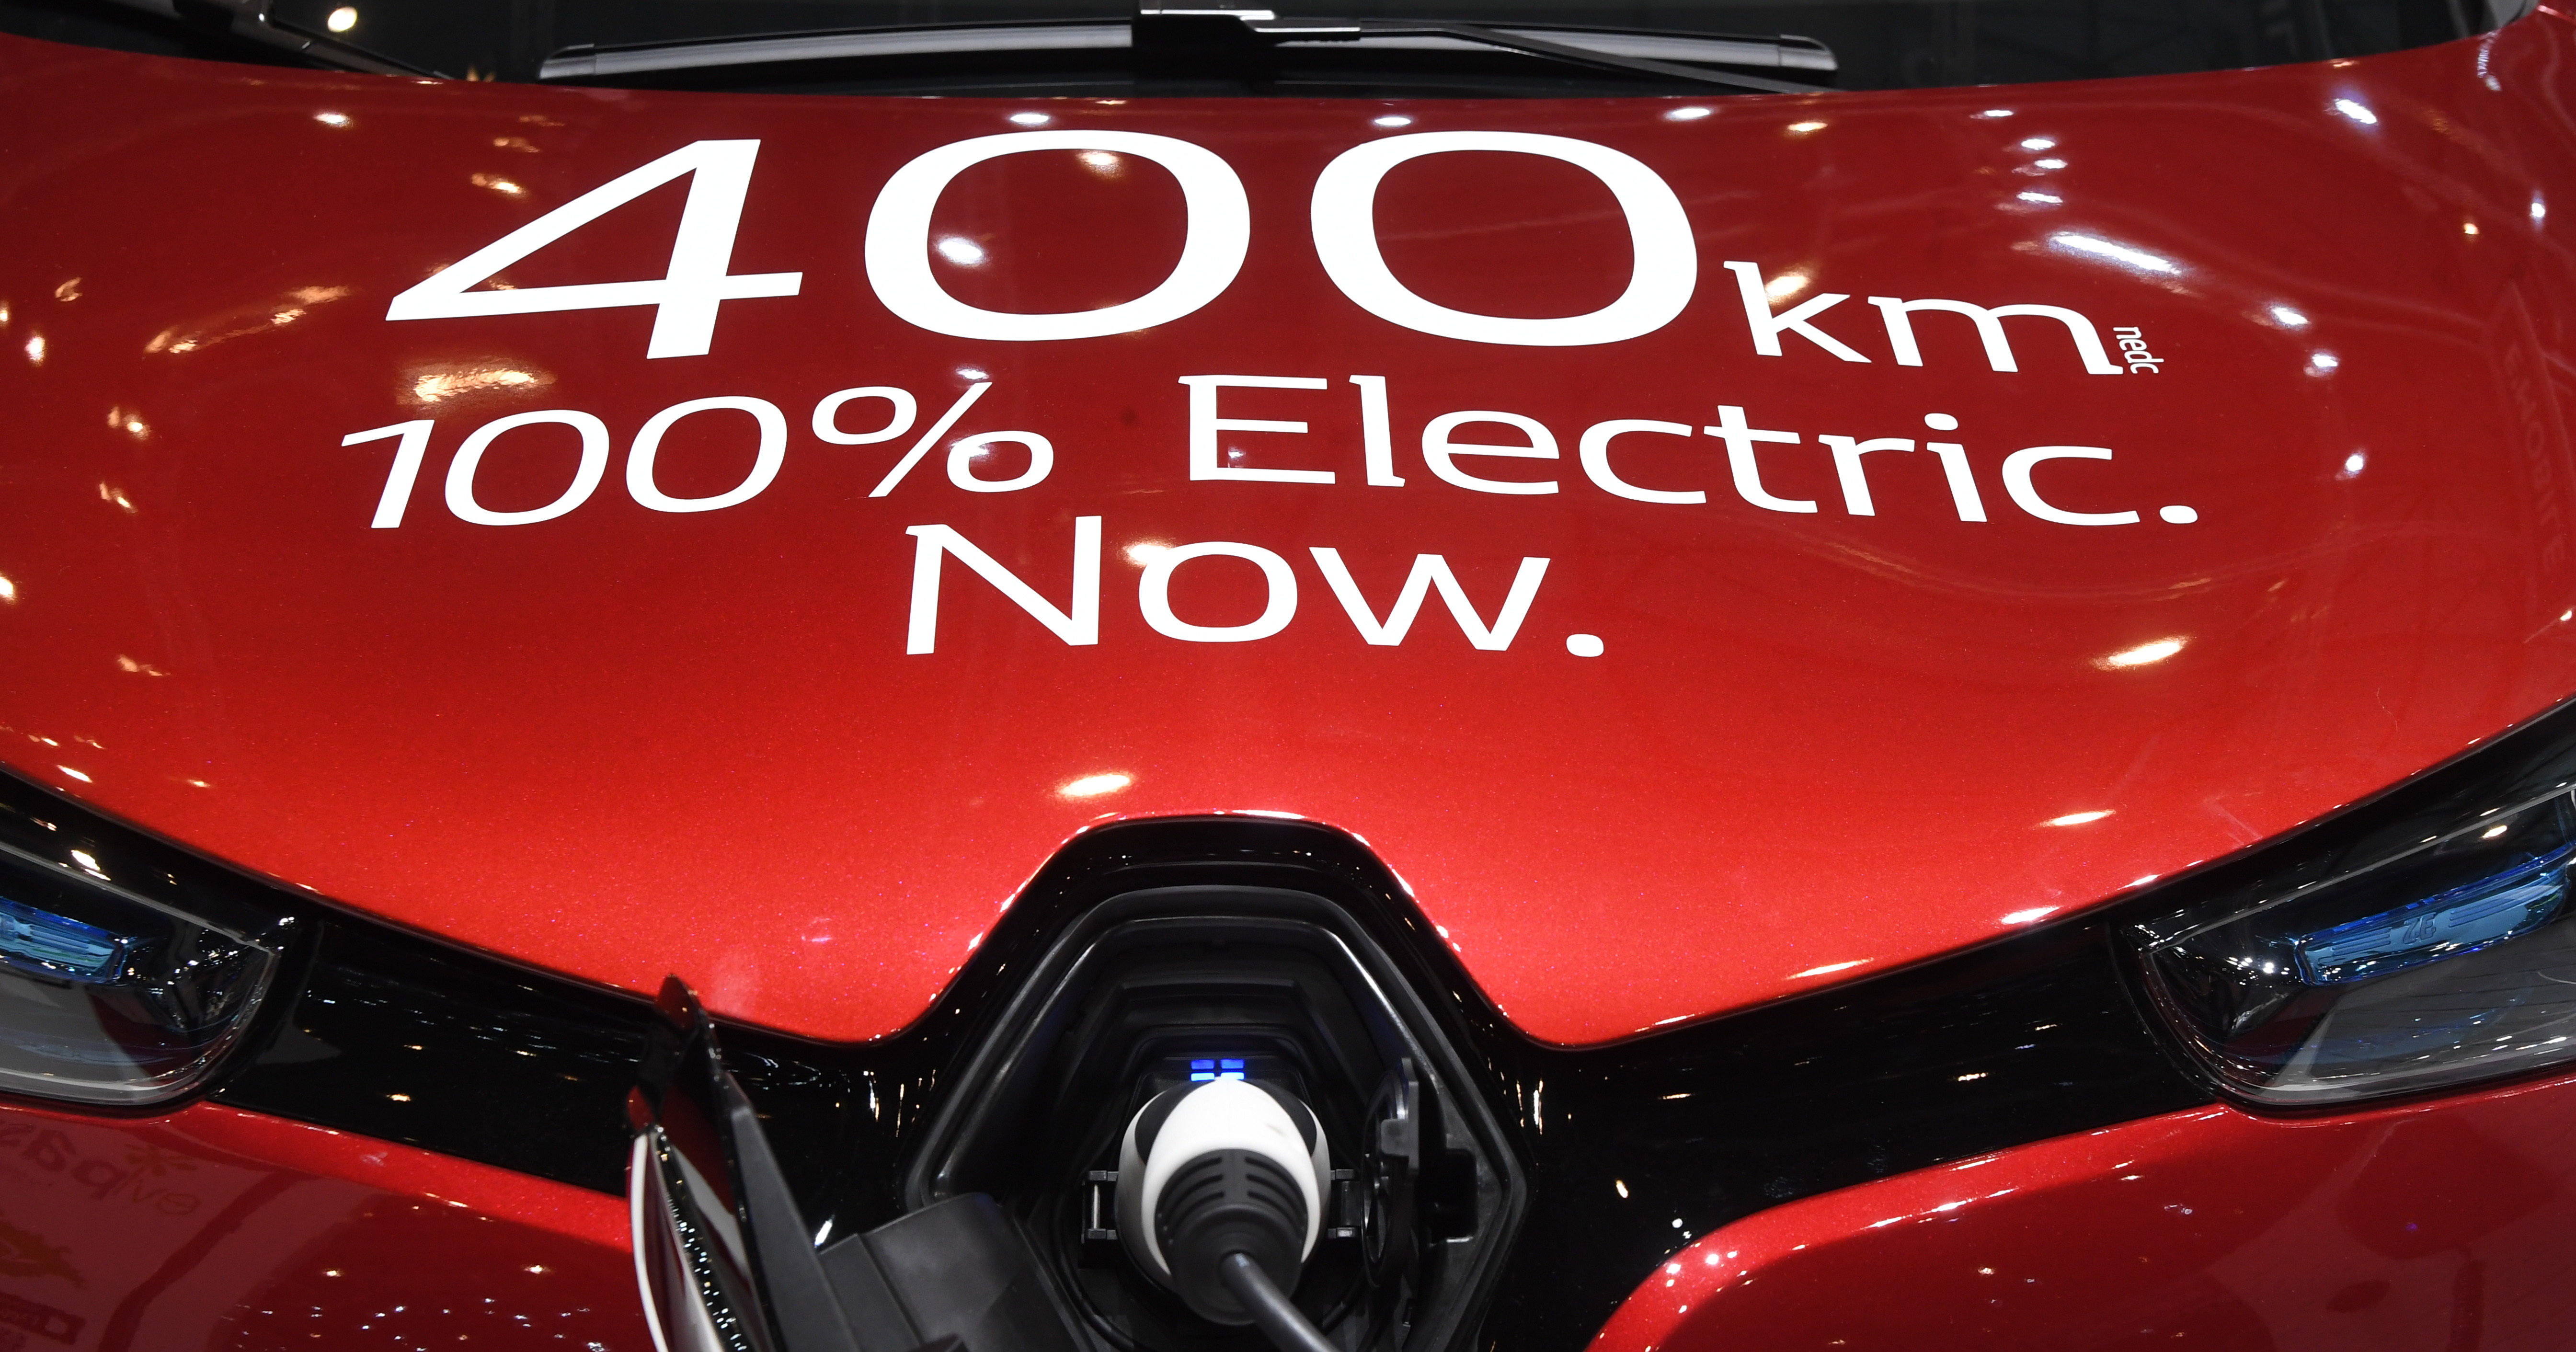 ‘Electric cars only get 60% as far as advertised’